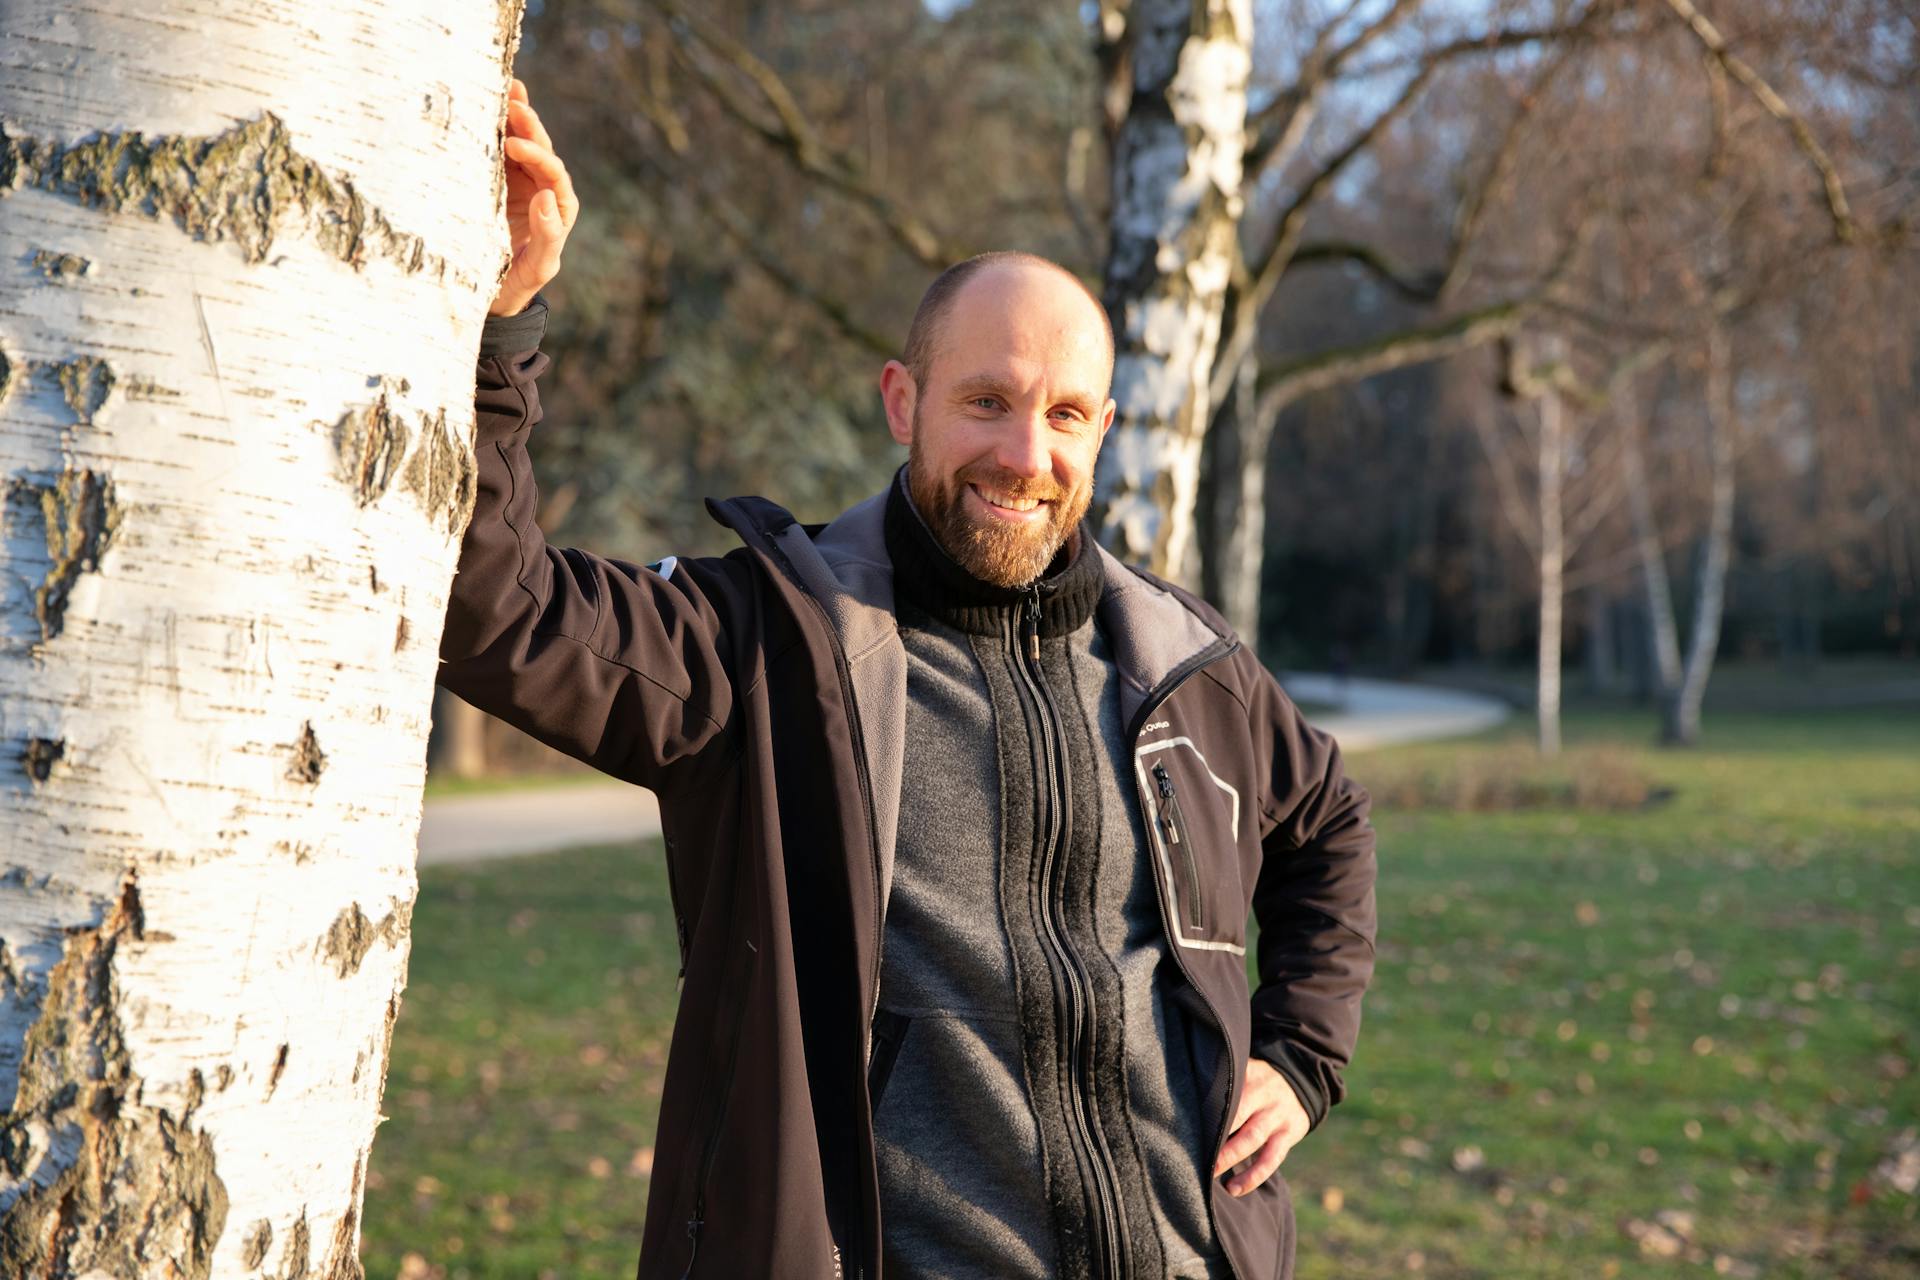 Personal Fitness Trainer Helge Thorn in der Natur